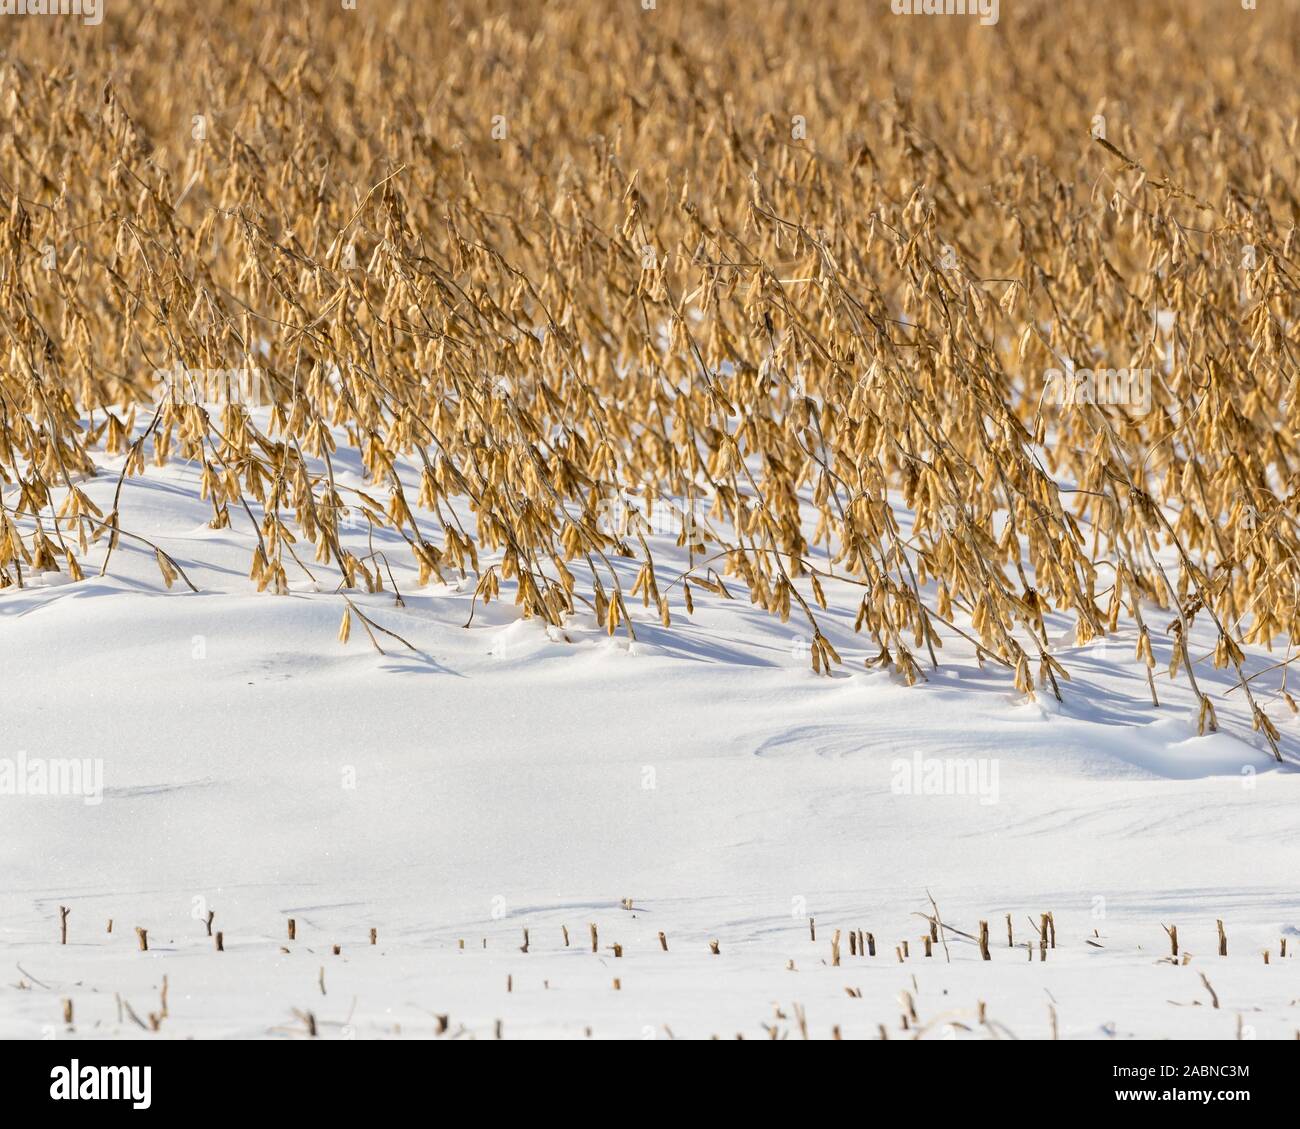 Soybean farm field with snowdrift covering bean stems and pods after early winter snowstorm delayed harvest in the Midwest Stock Photo